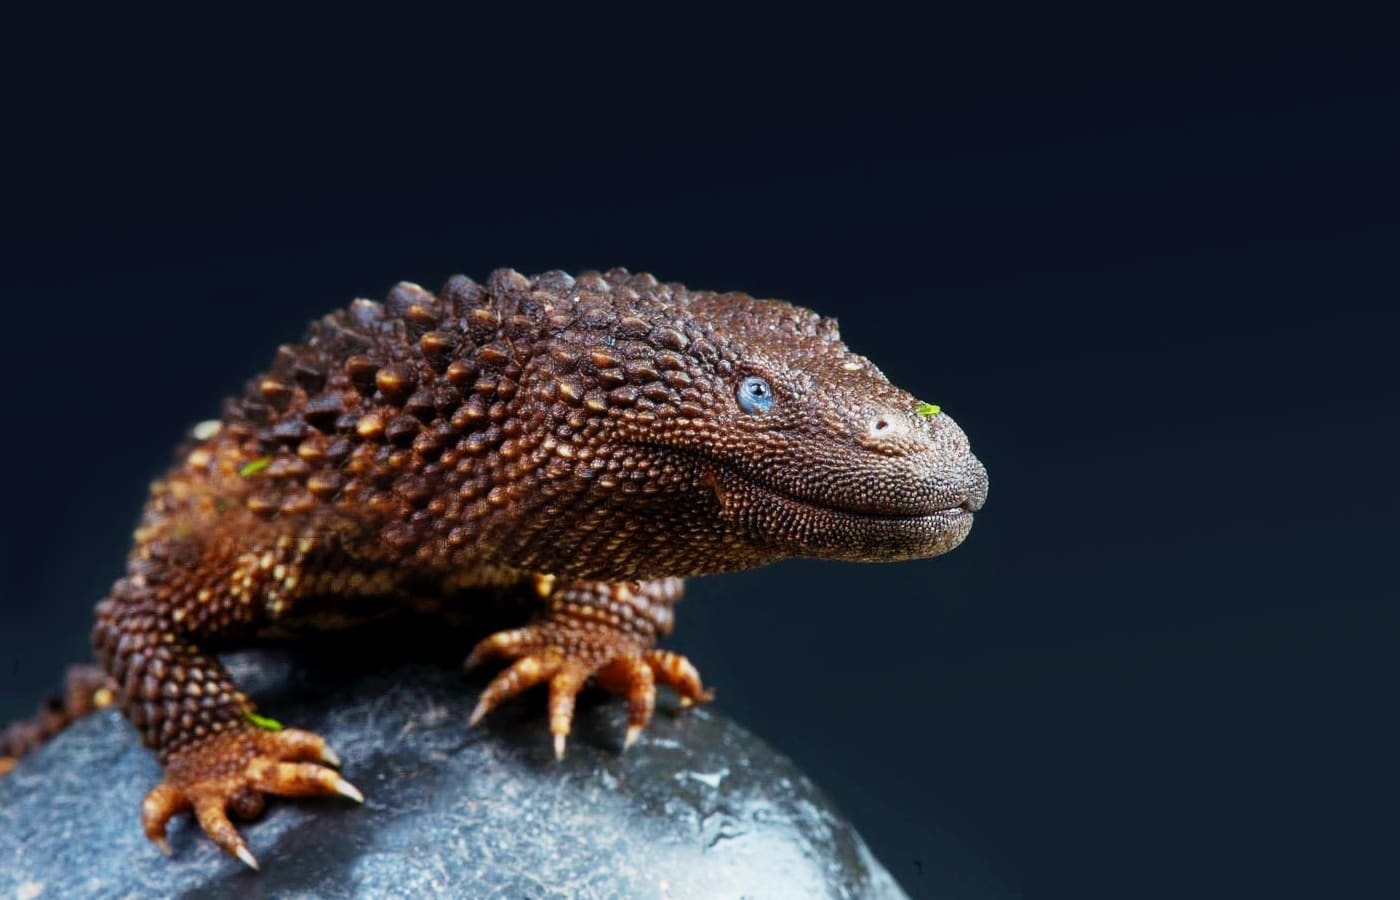 This is dragon-like creature is the Earless Monitor Lizard which is native to island of Borneo in Malaysia & Indonesia. It is semi-aquatic, nocturnal & with pronounced tubercle scales. It lacks external ear opening but still capable of hearing. The ave adult can grow up to 8 inches in length (SVL).